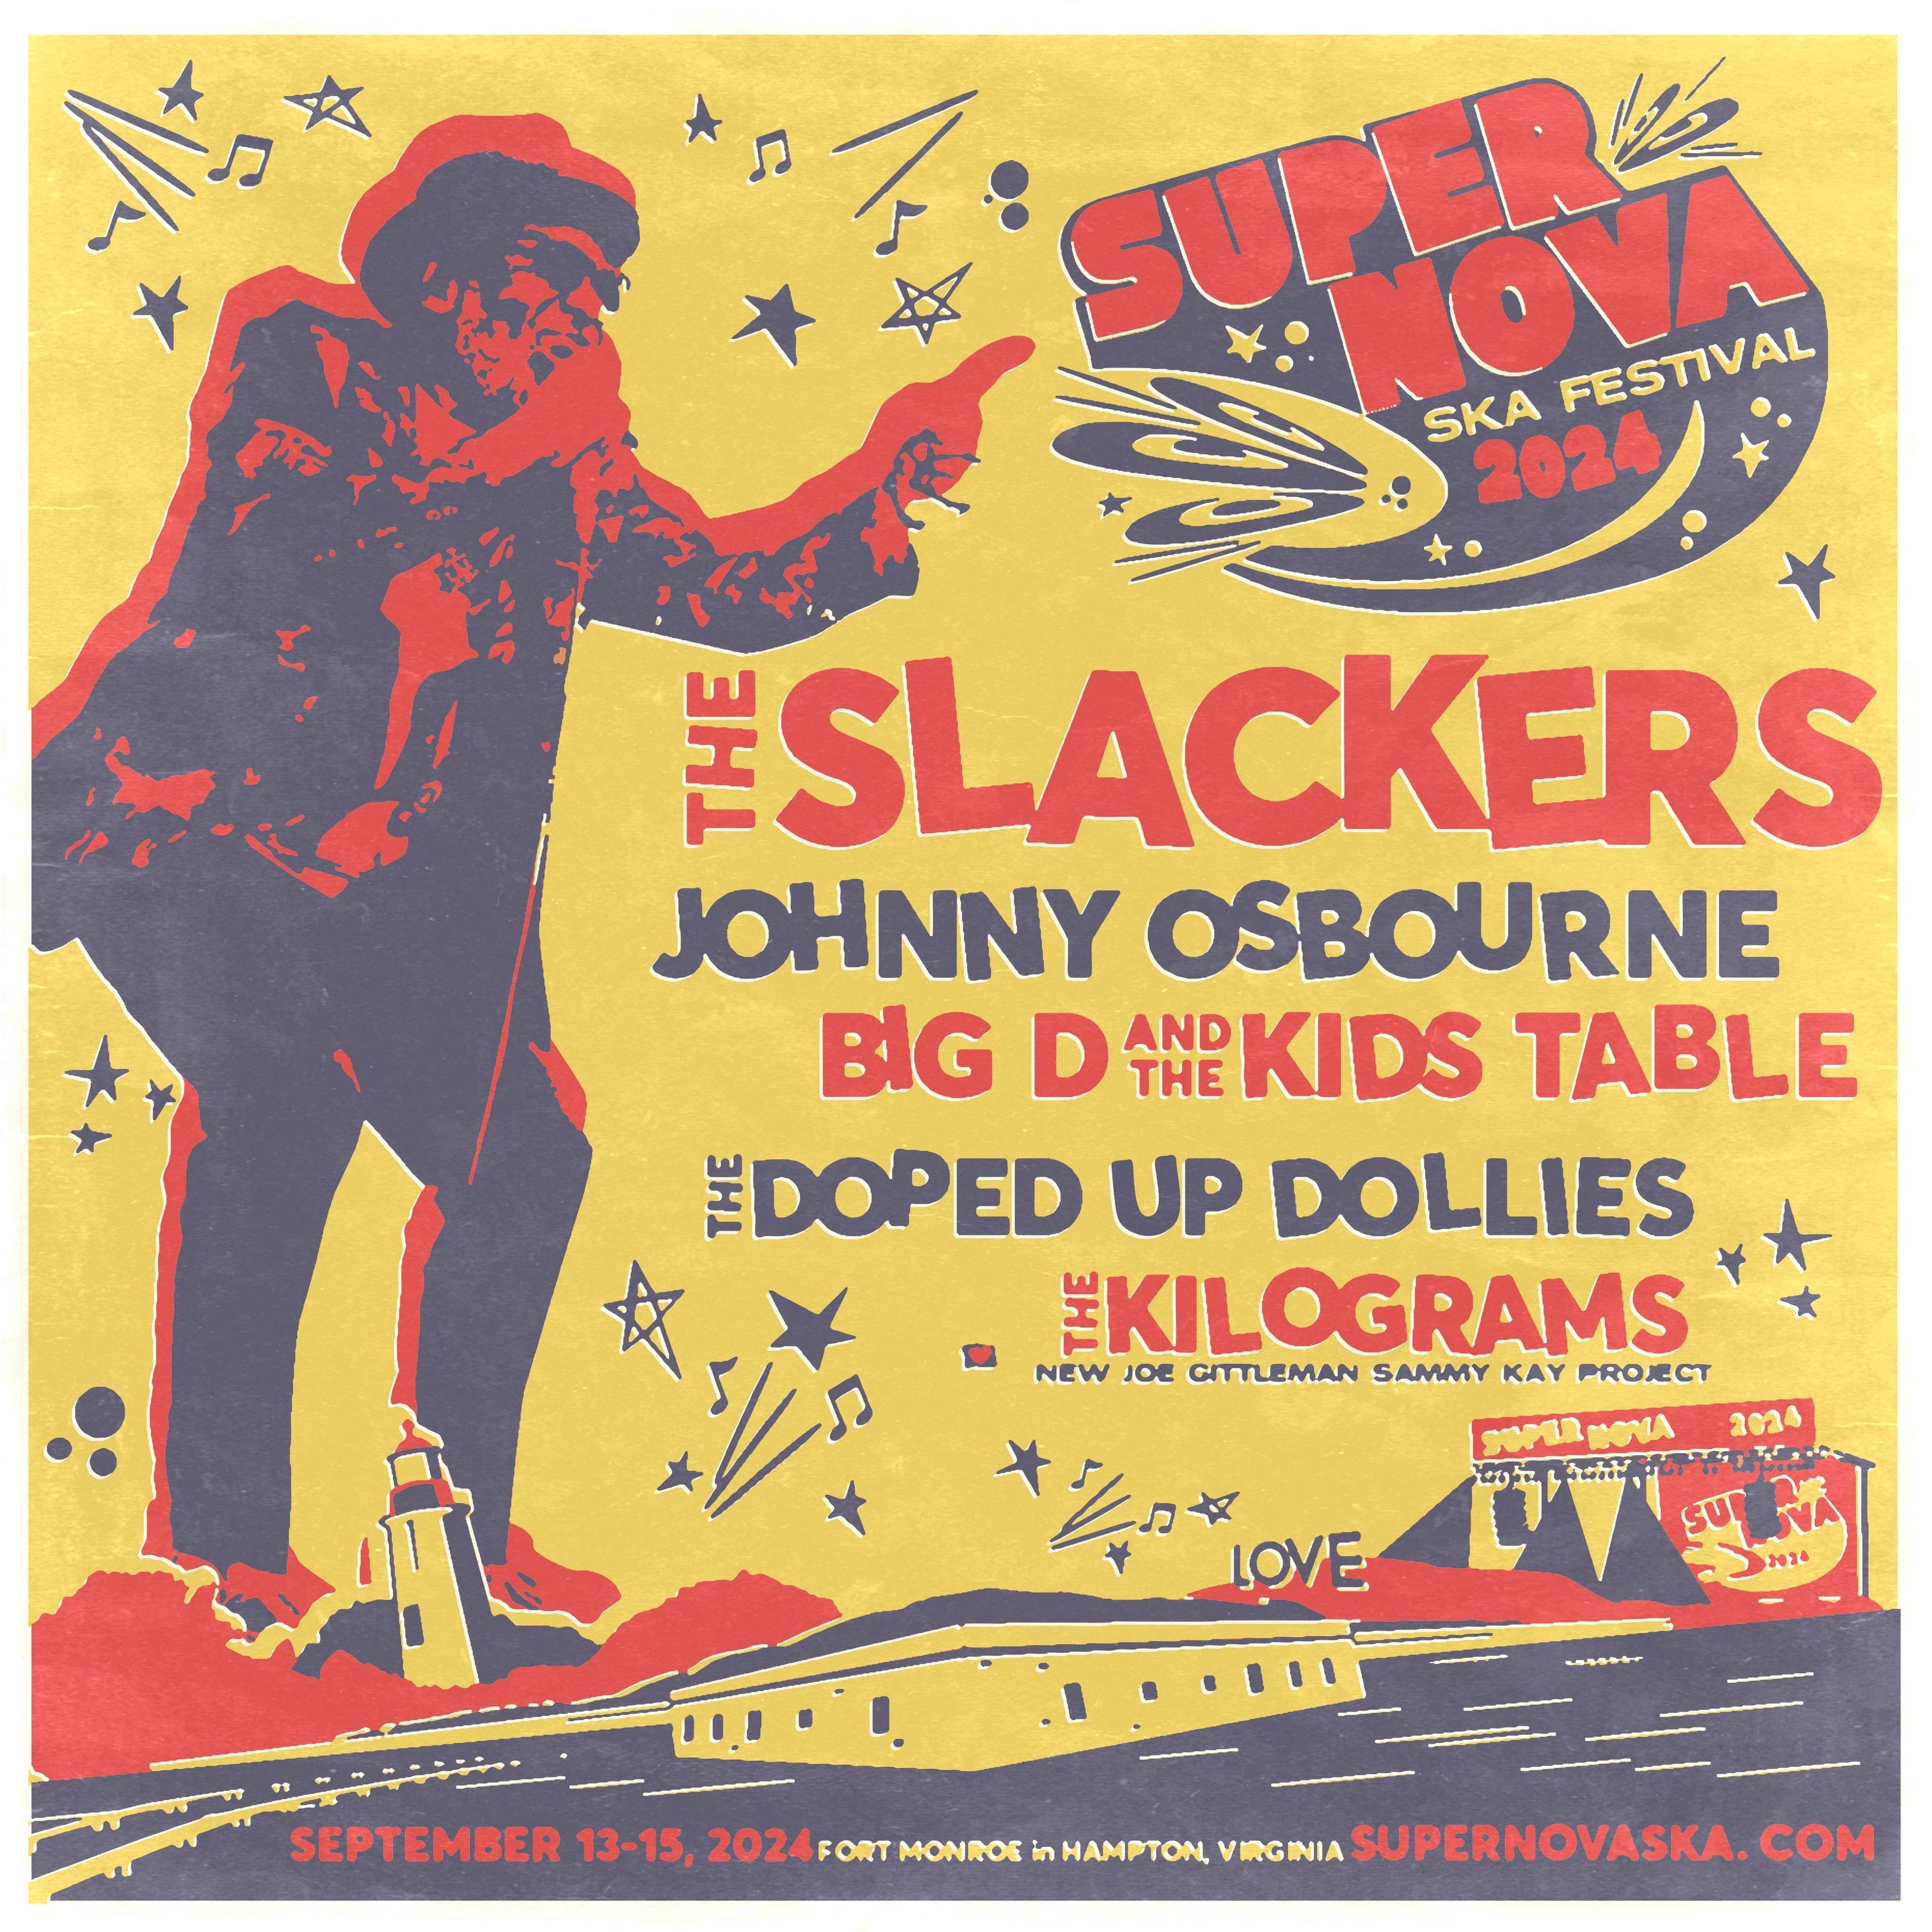 The Slackers, Johnny Osbourne, Big D & the Kids Table, The Doped Up Dollies, and The Kilograms